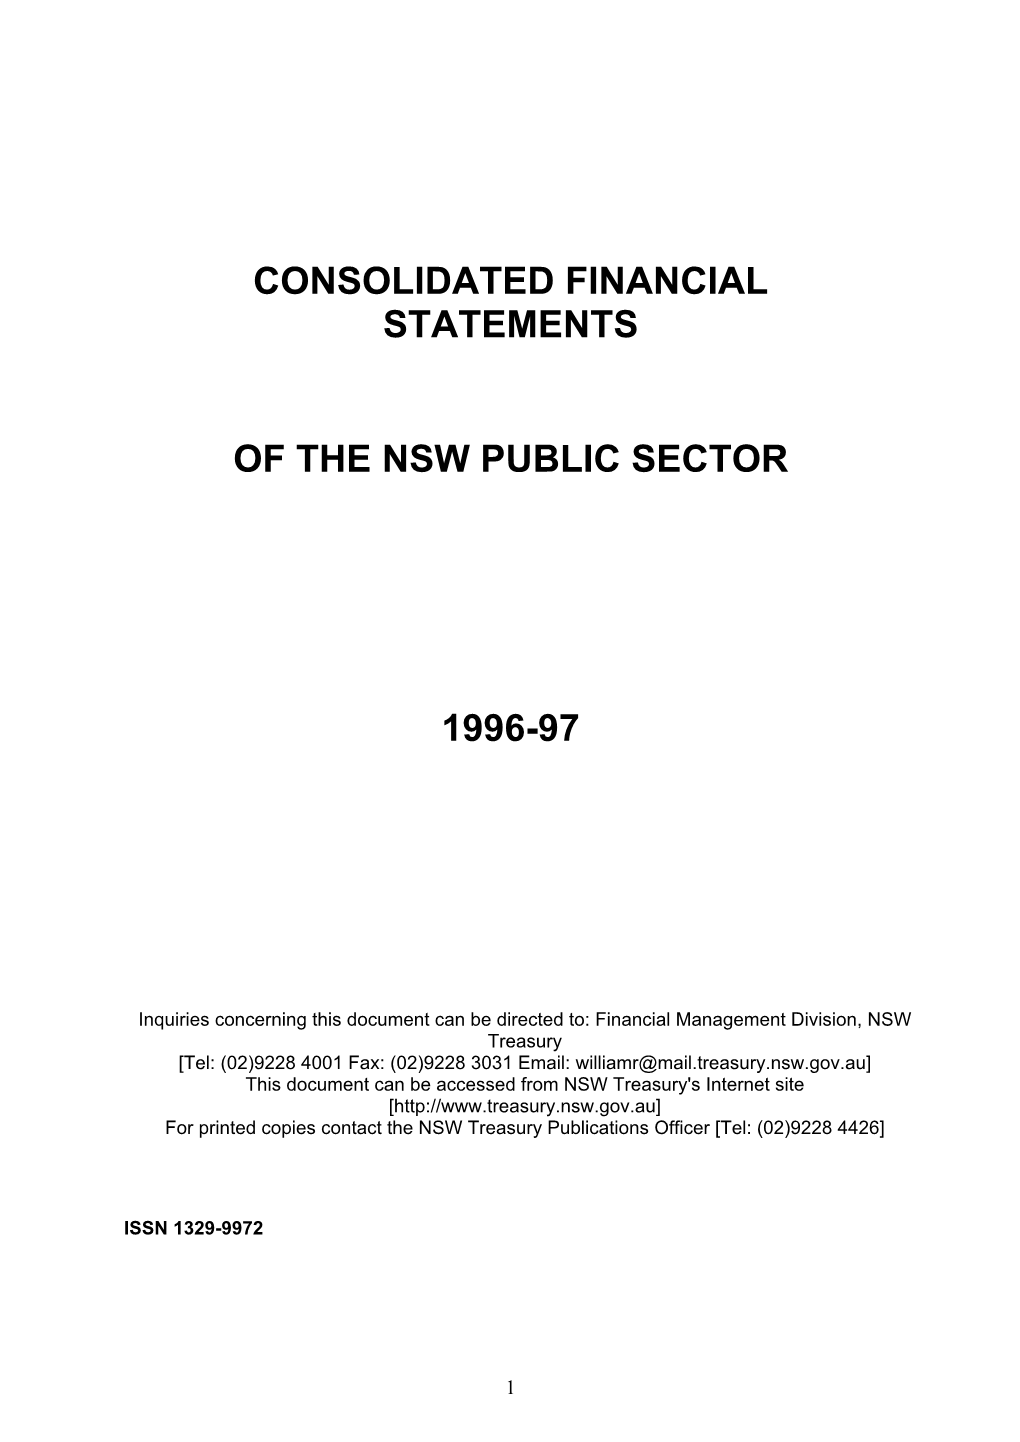 Consolidated Financial Statement of the NSW Public Sector 1996-97